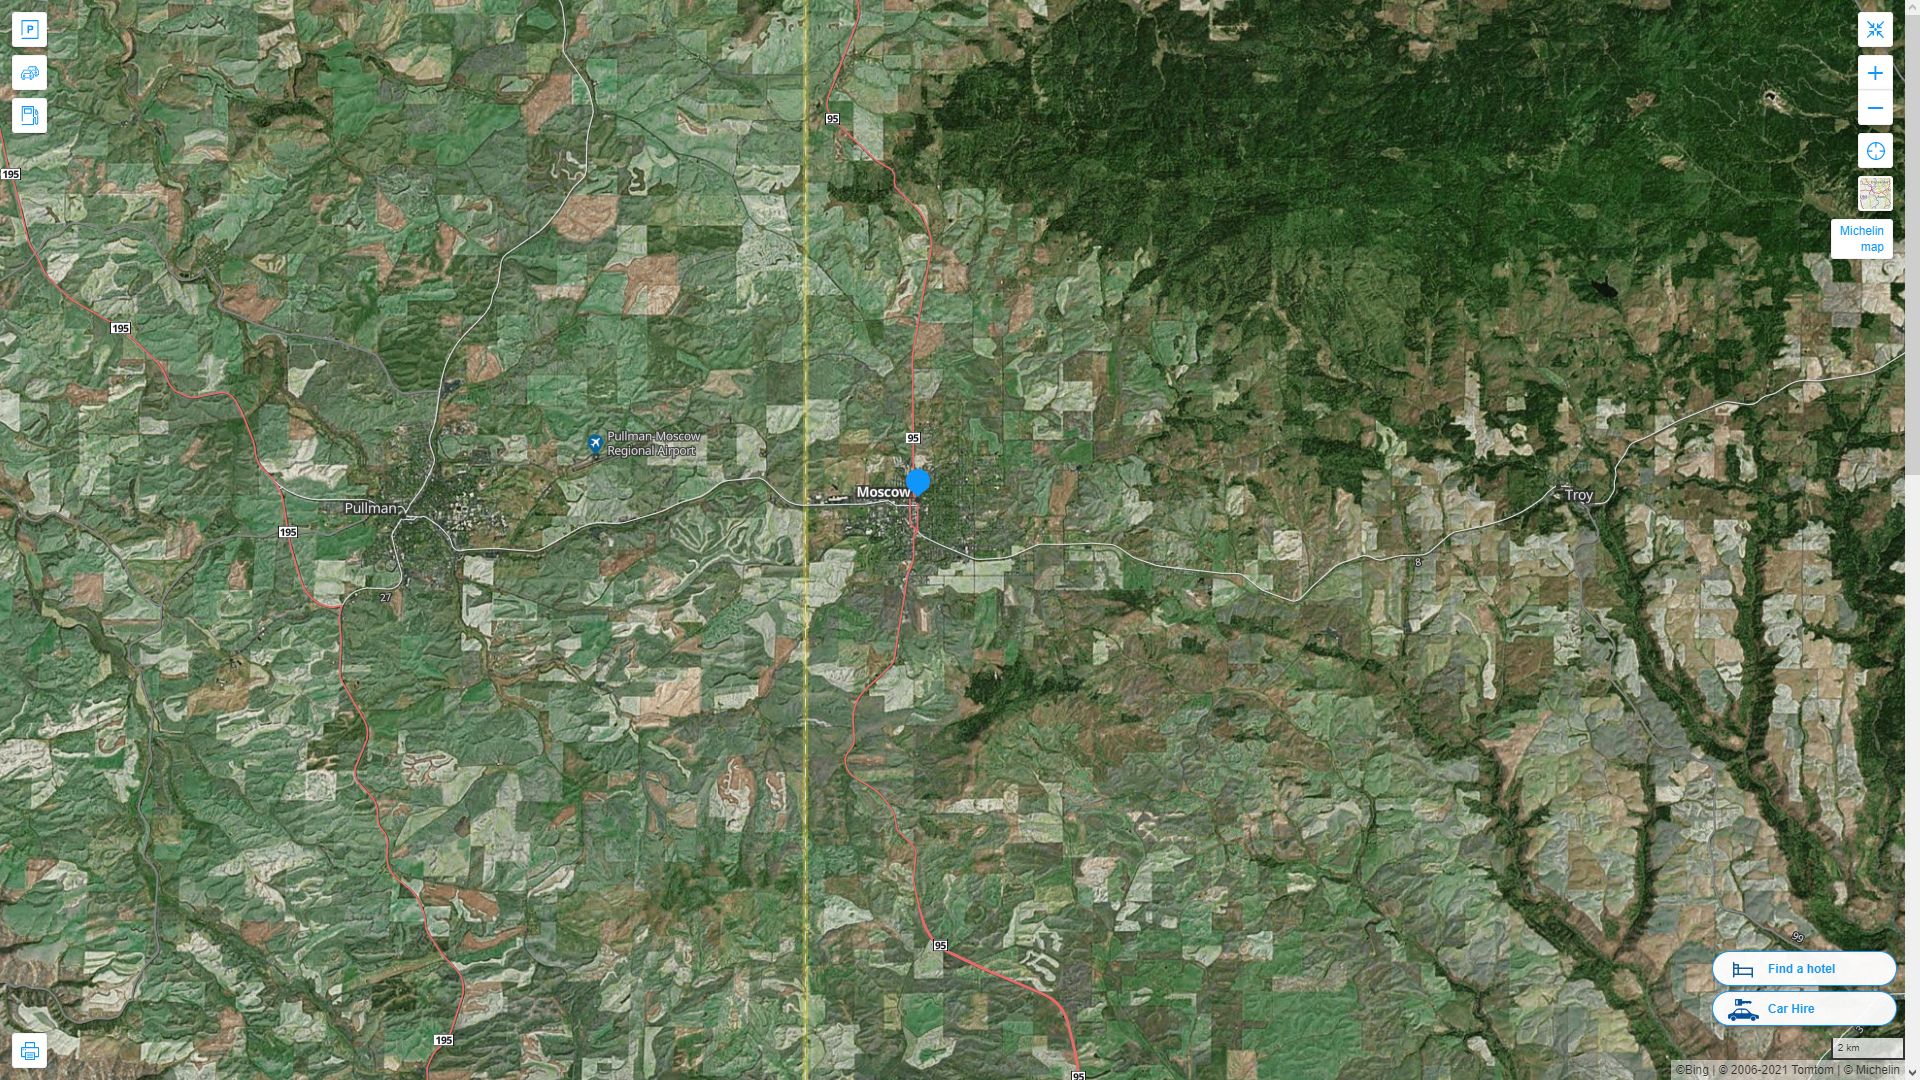 Moscow idaho Highway and Road Map with Satellite View